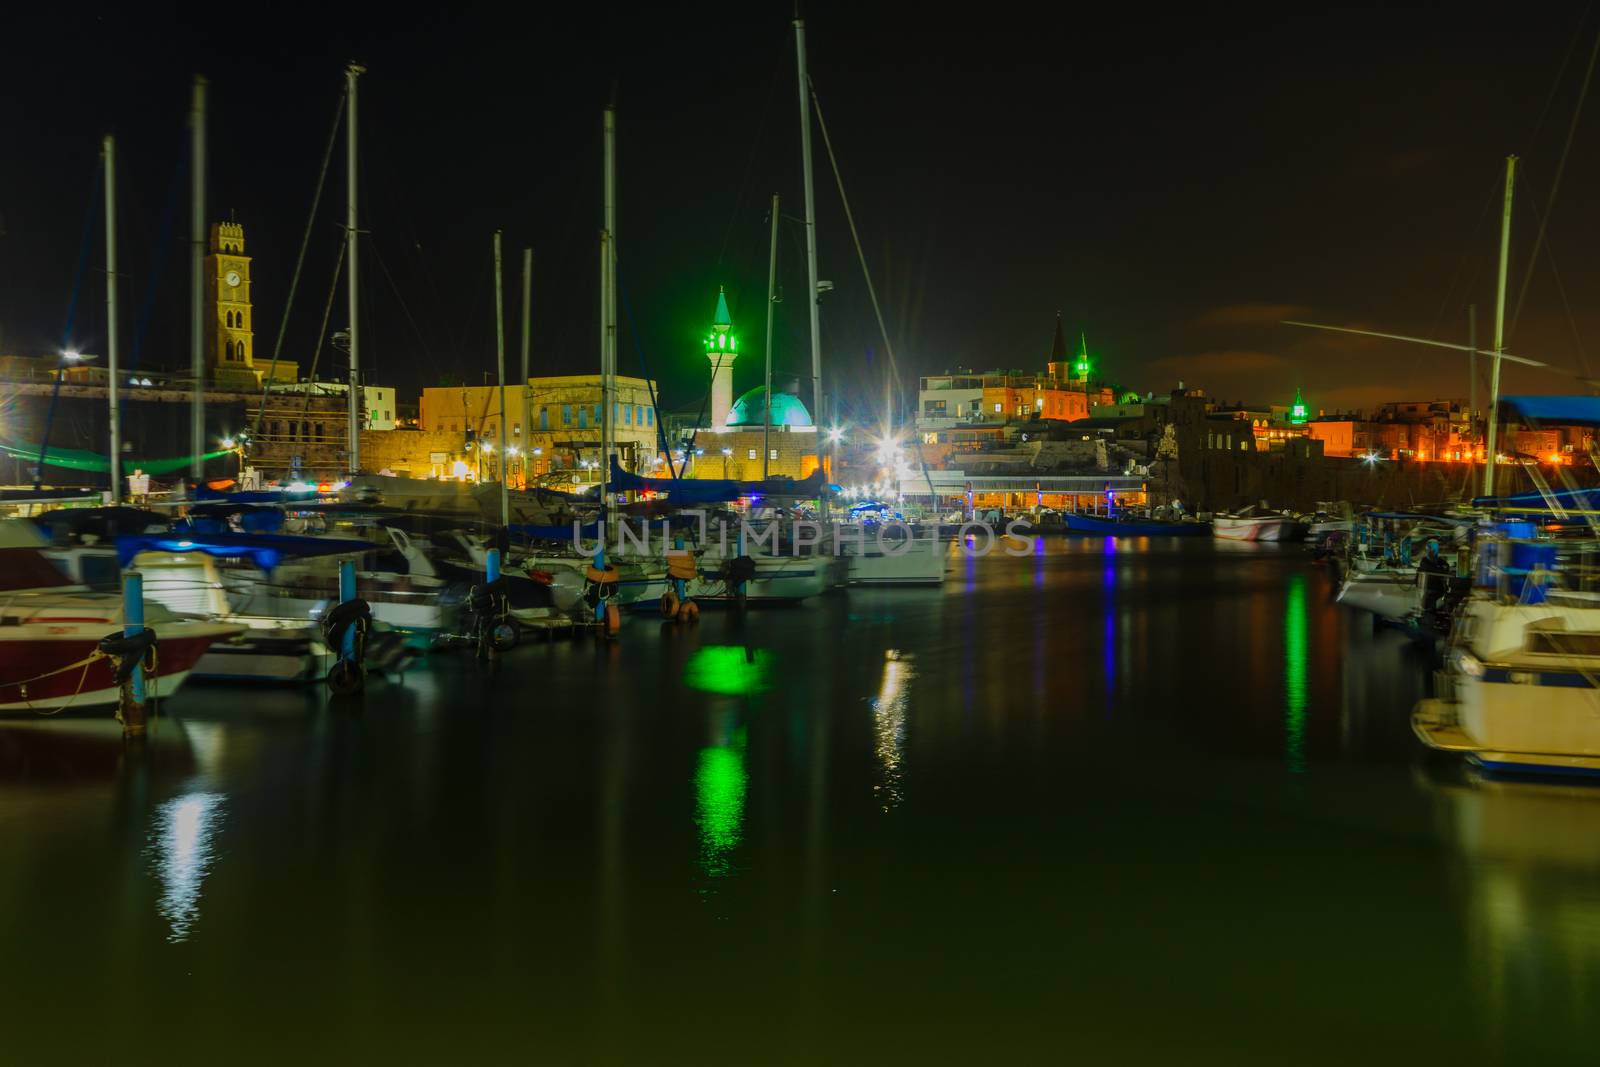 Evening view of the fishing port and other monuments, in the old city of Acre (Akko), Israel